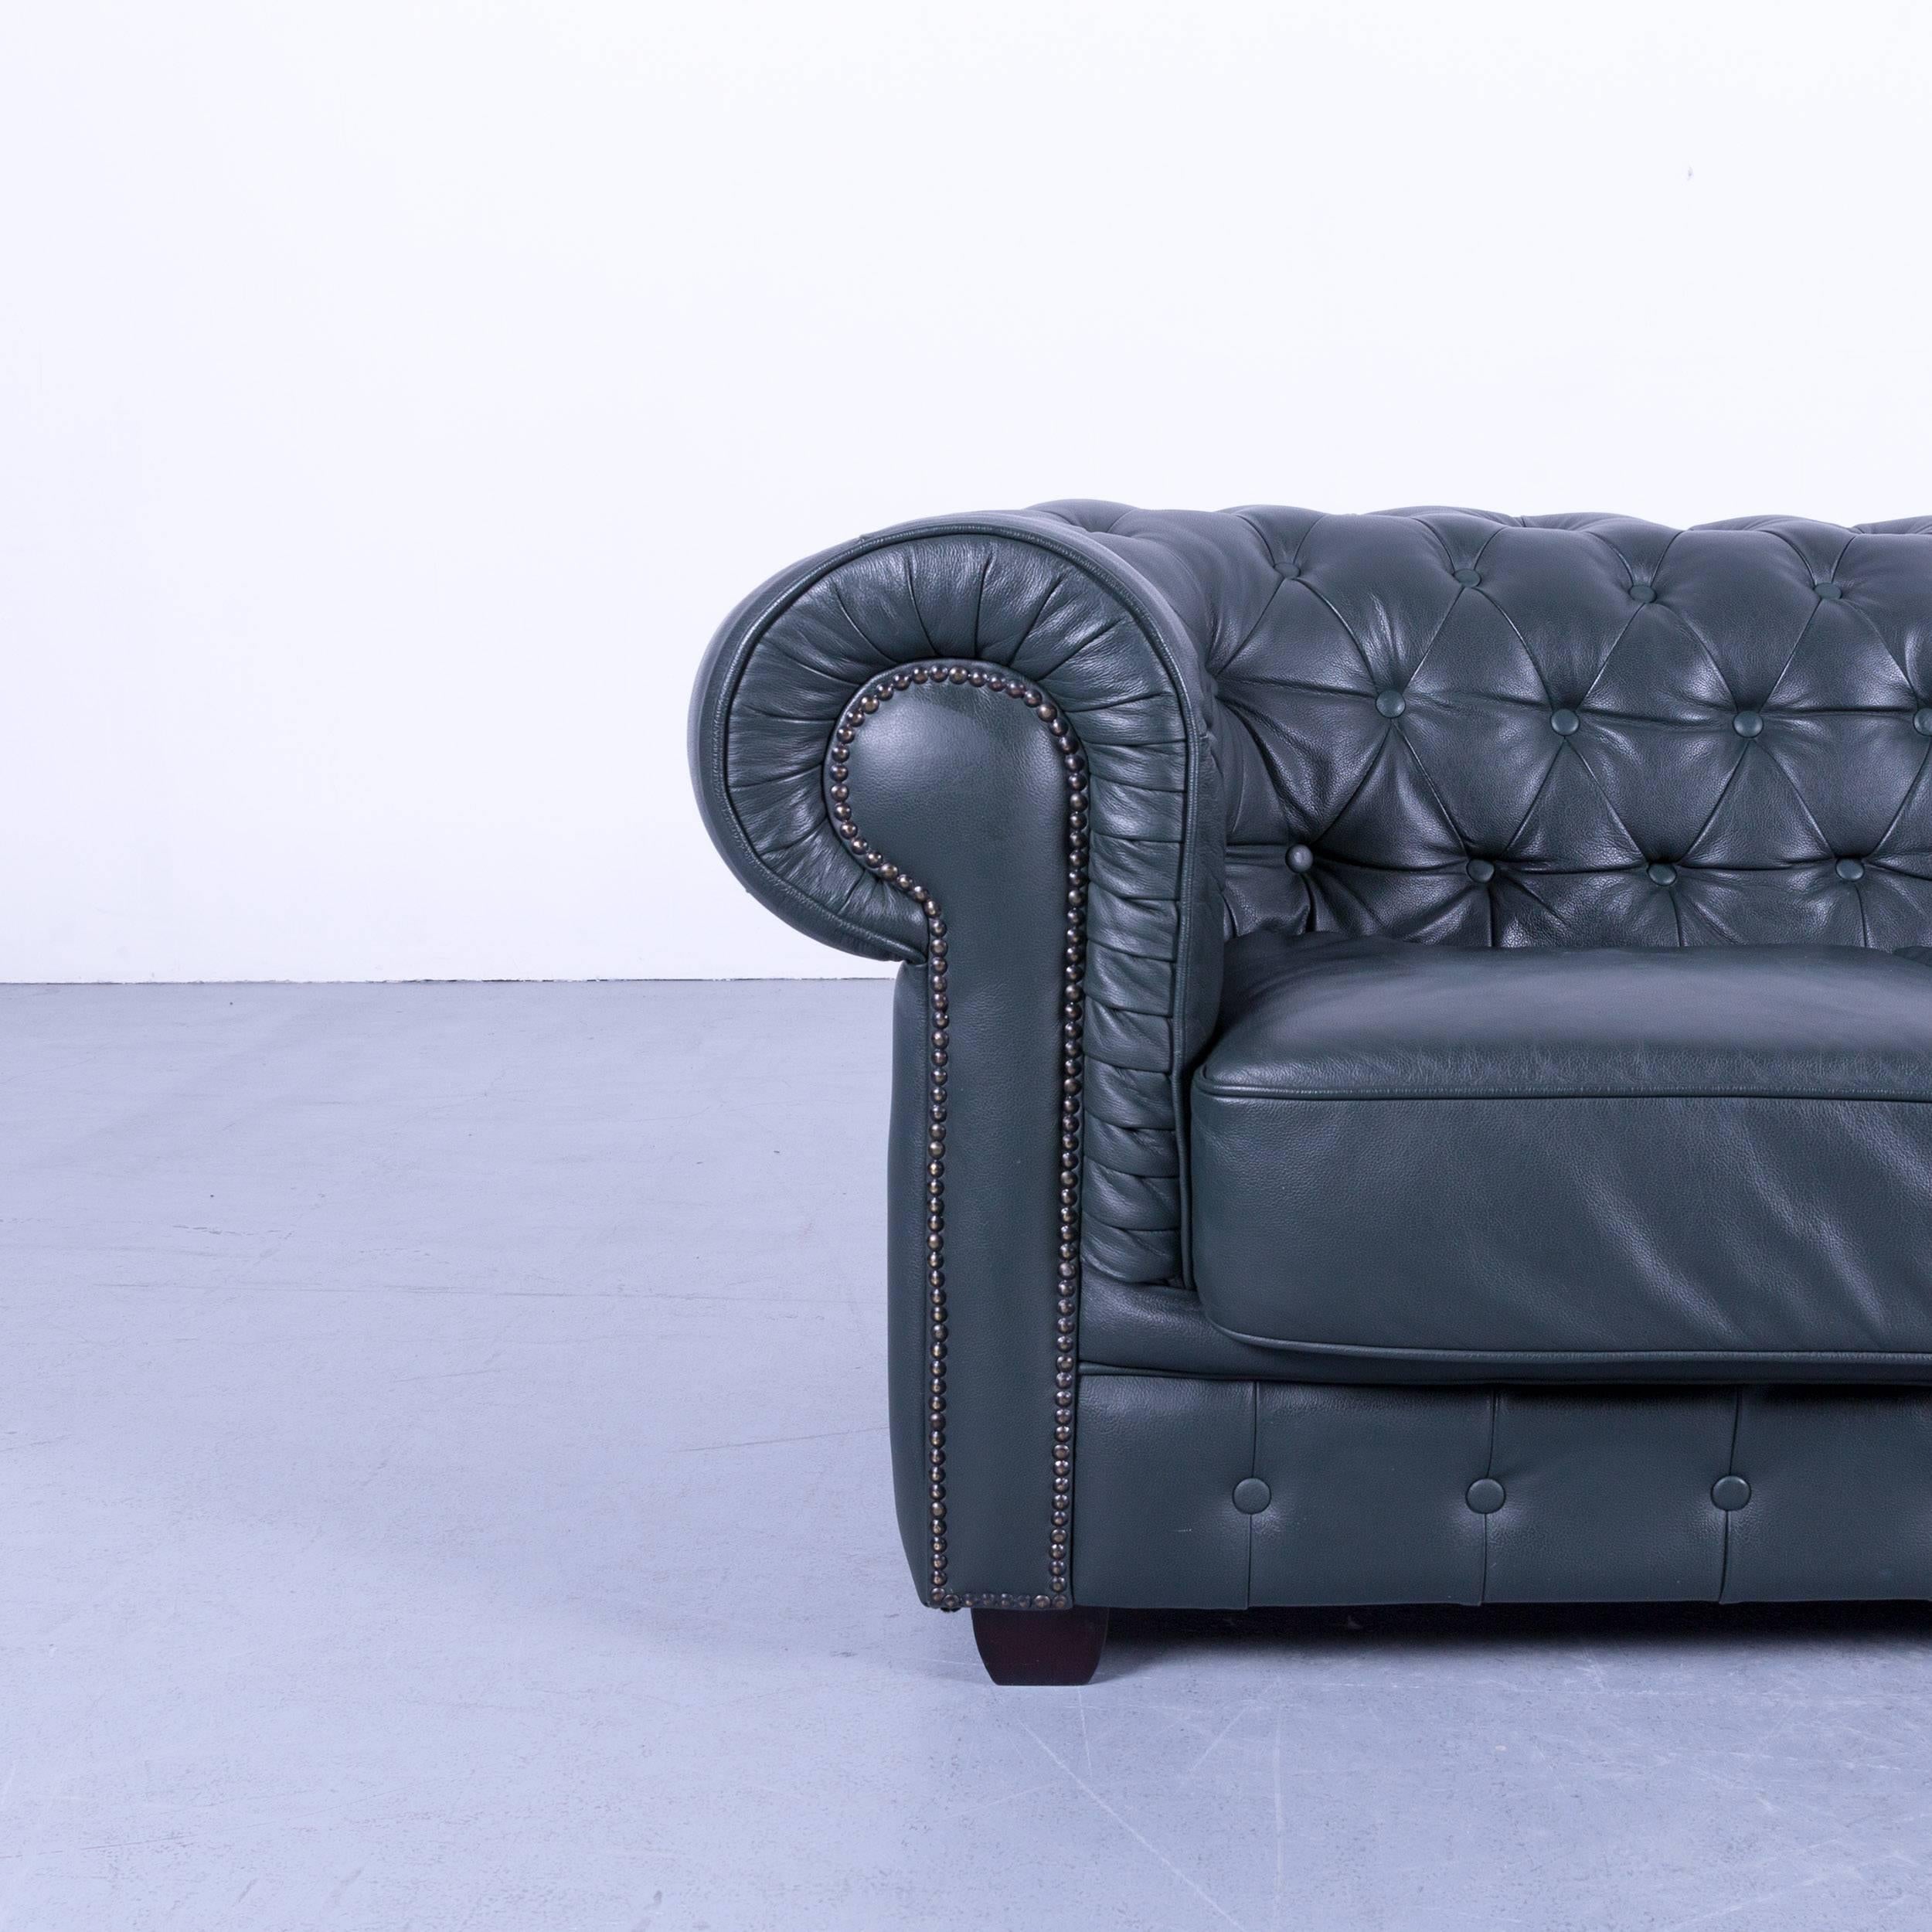 Chesterfield sofa dark green two-seat vintage retro couch rivets UK, made for pure comfort and elegance.